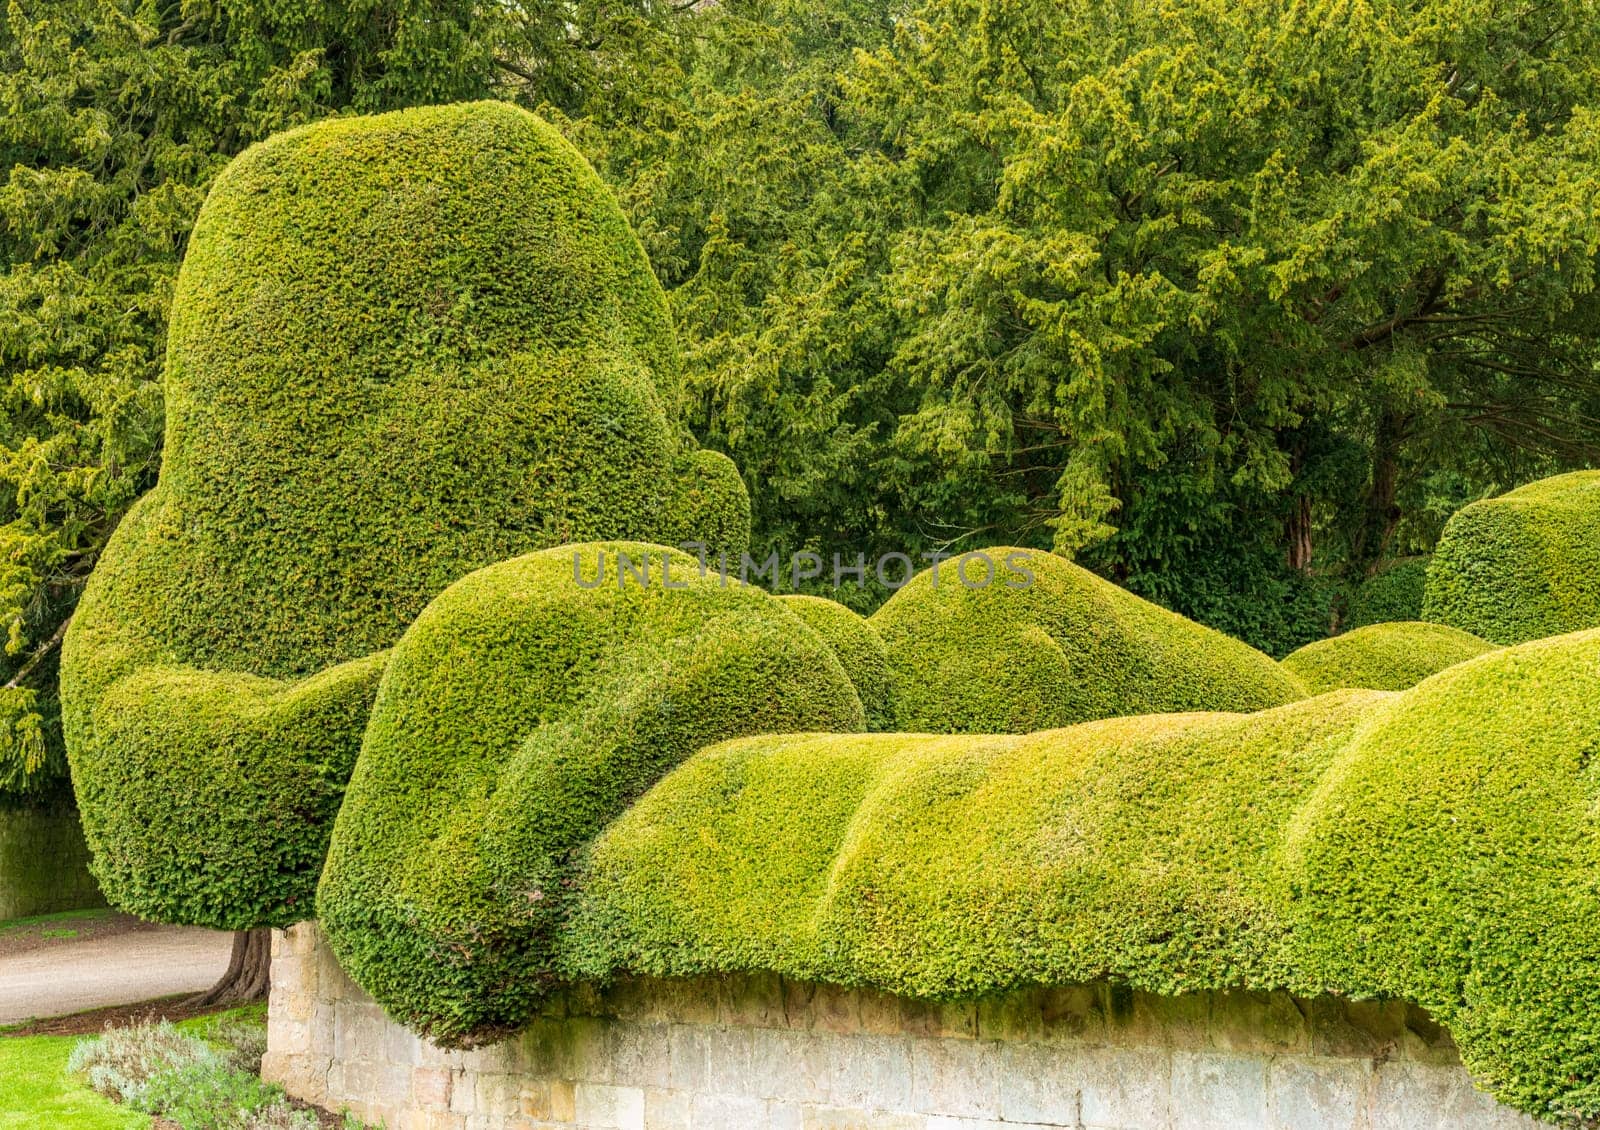 Unusual curvy topiary of yew bushes in garden in Yorkshire by steheap